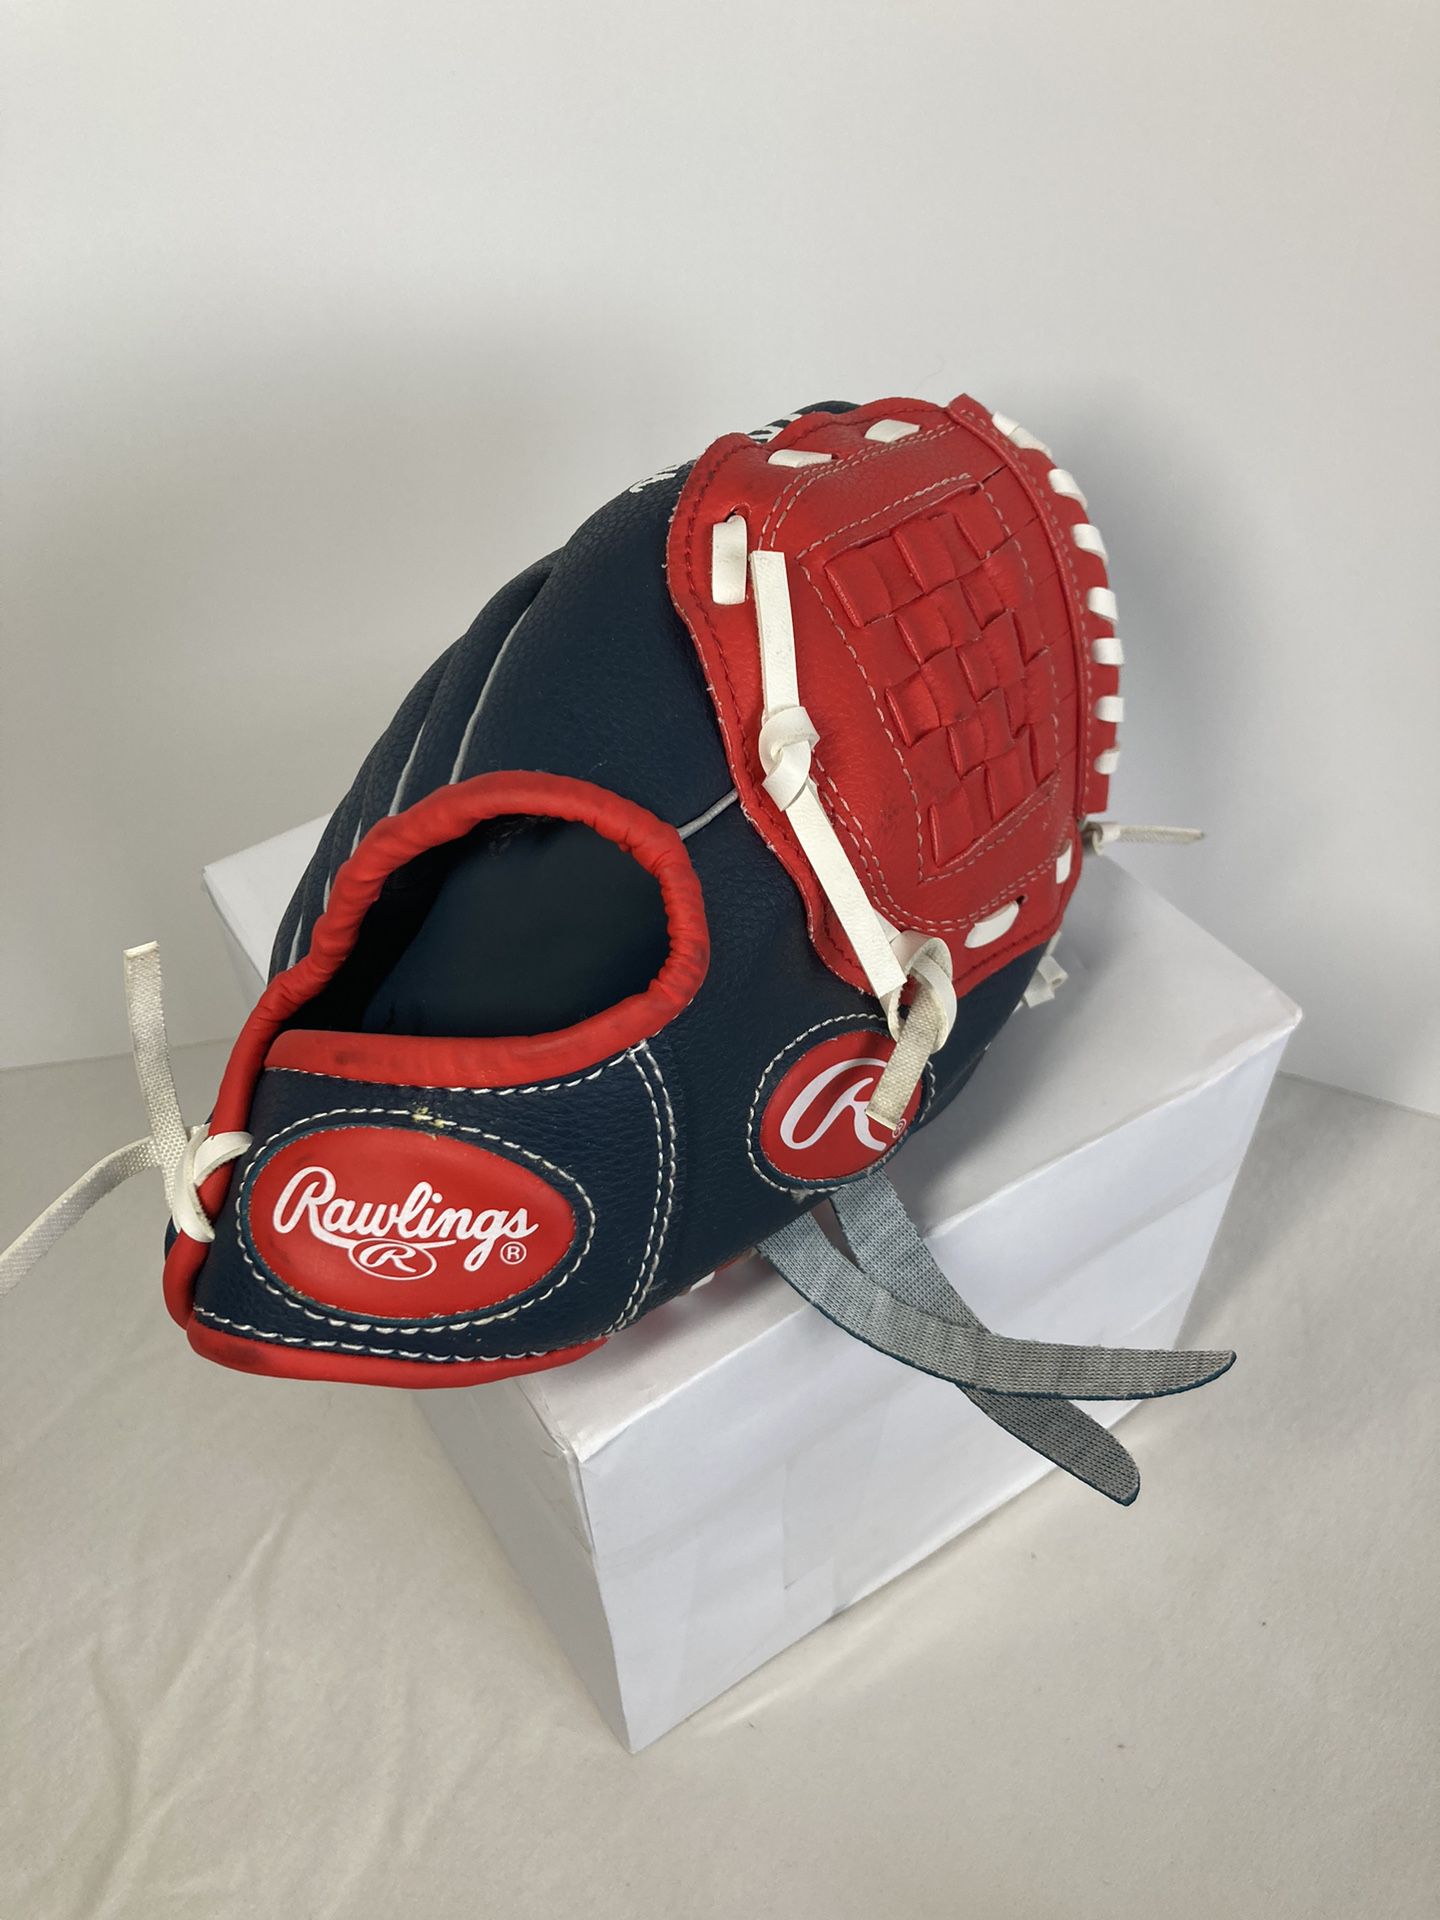 New Baseball Glove Rawlings  9.5" WPL95NS Youth Player Series  RHT Blue Red